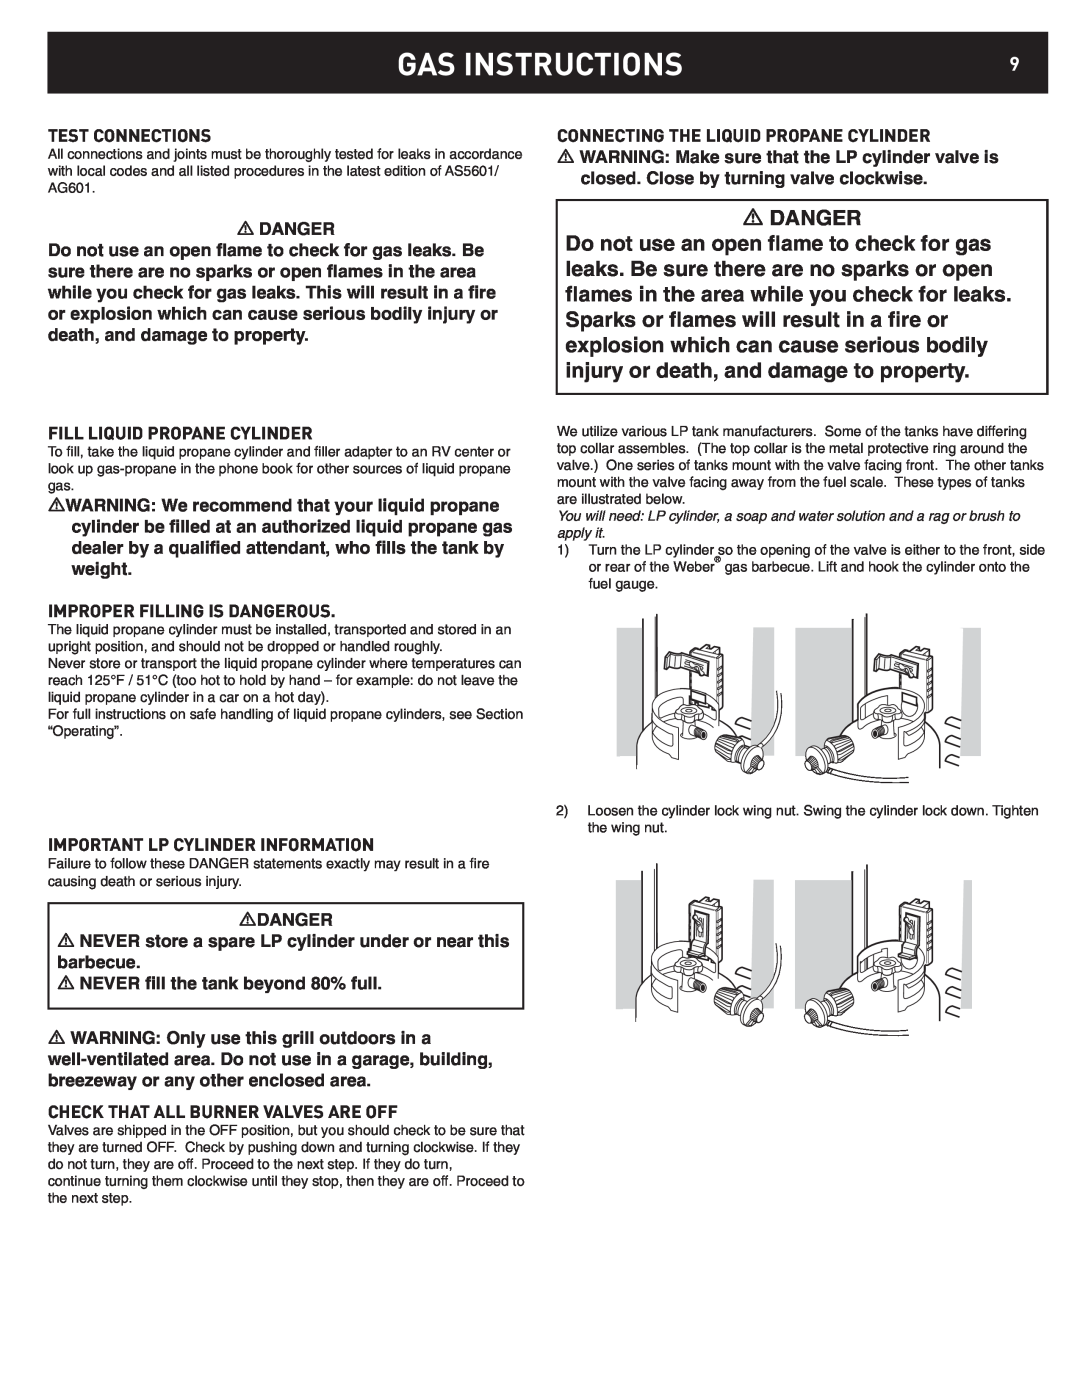 Weber 42376 manual Connecting The Liquid Propane Cylinder, Fill Liquid Propane Cylinder, Improper Filling Is Dangerous 